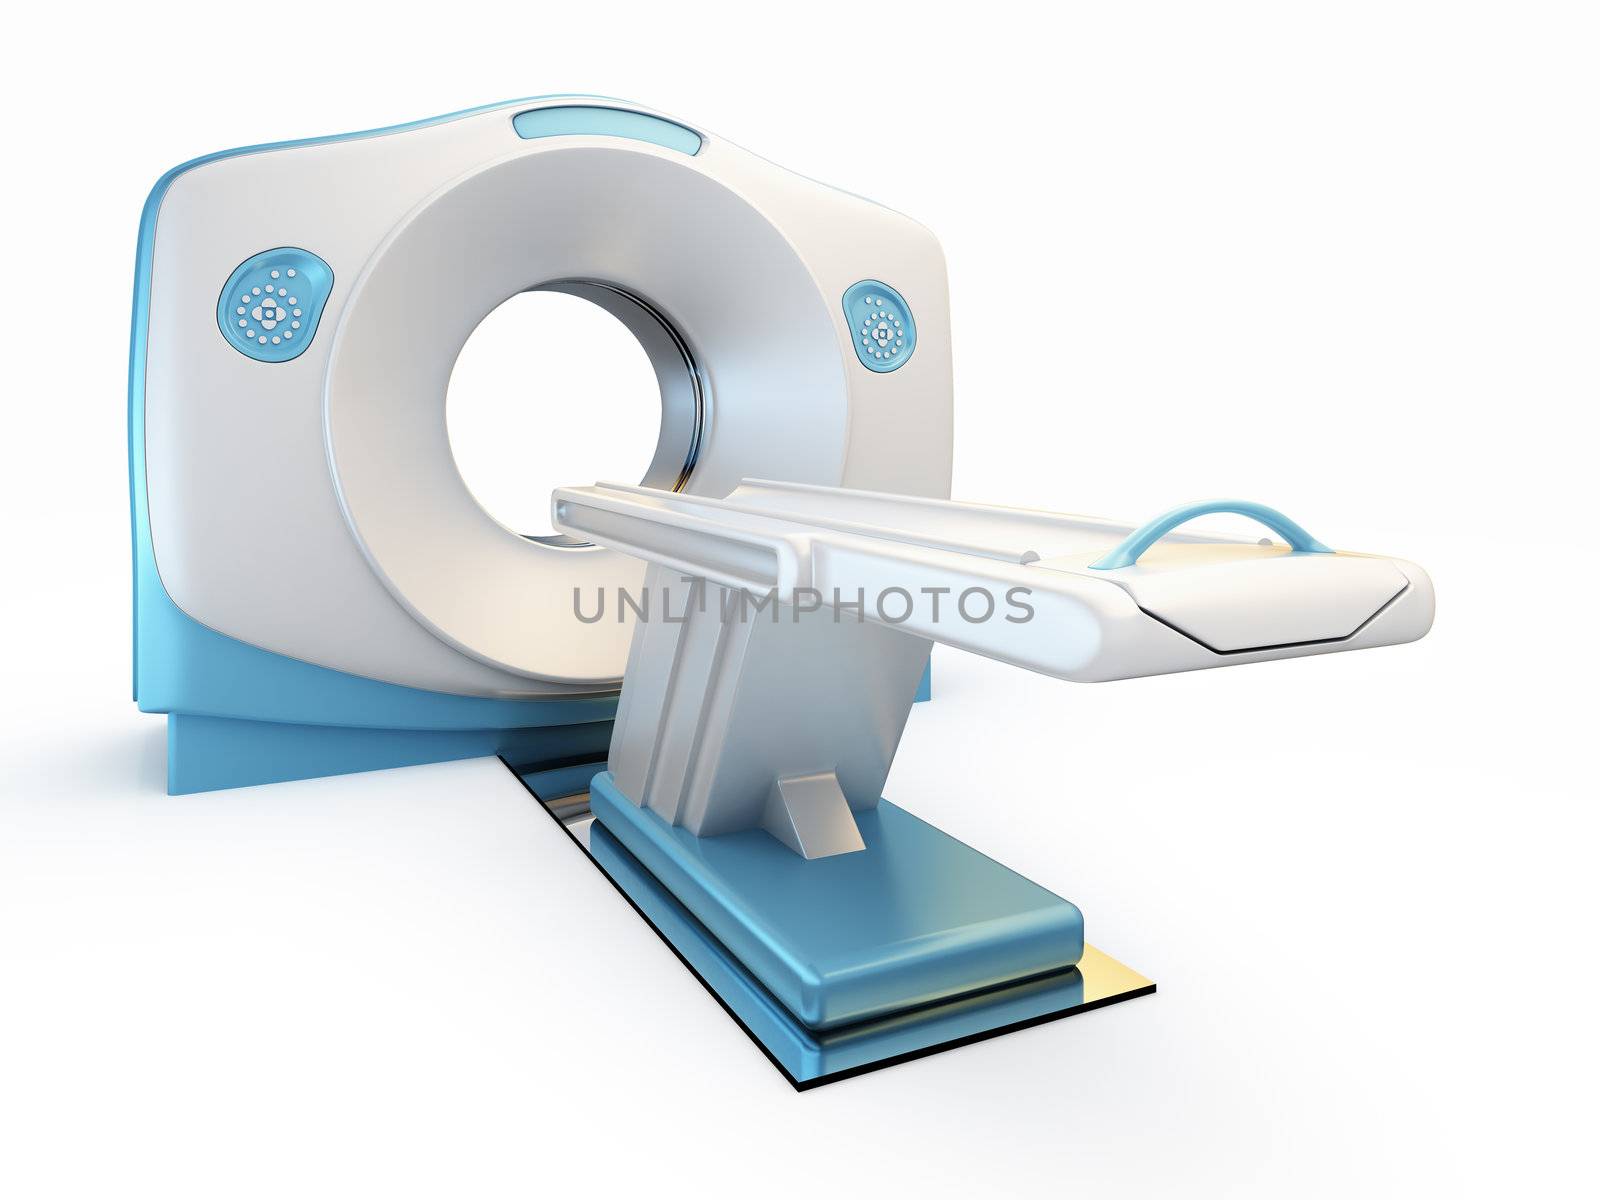 A 3D illustration of a MRI(Magnetic Resonance Imaging) scanner, isolated on white background.